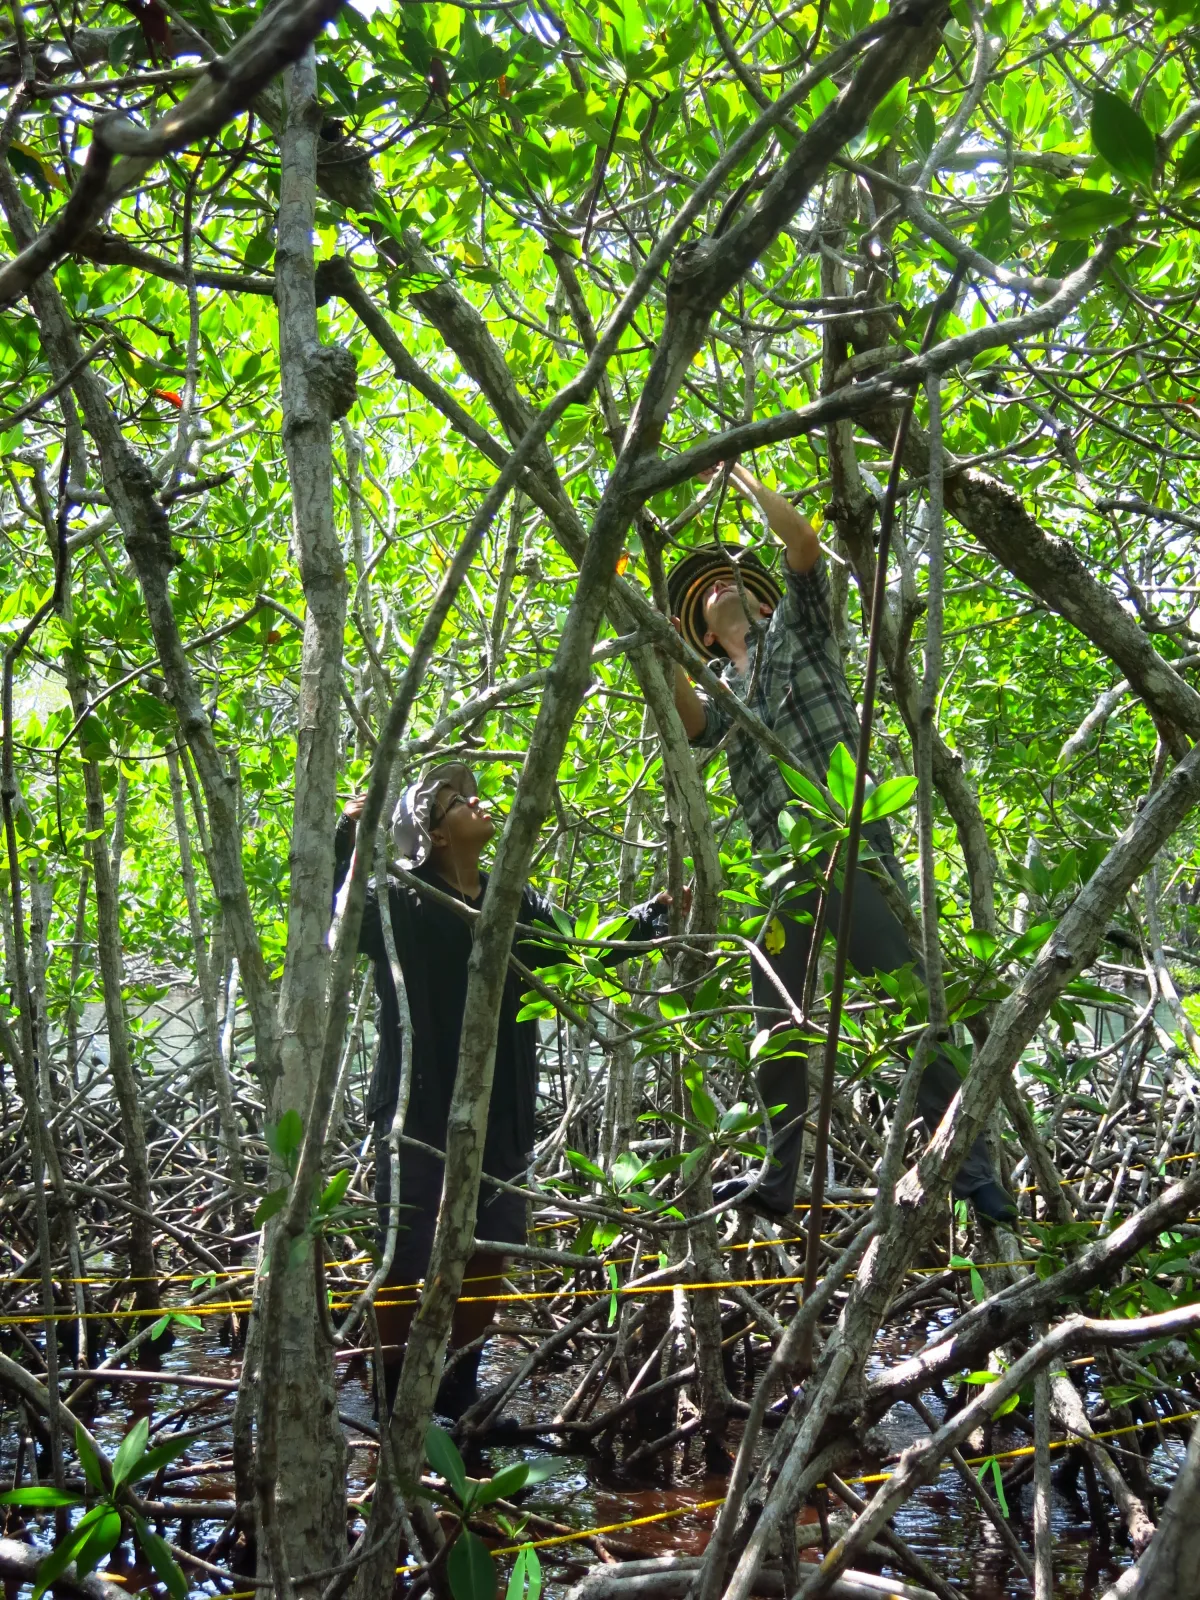 Lush green canopy of mangroves with 2 people working